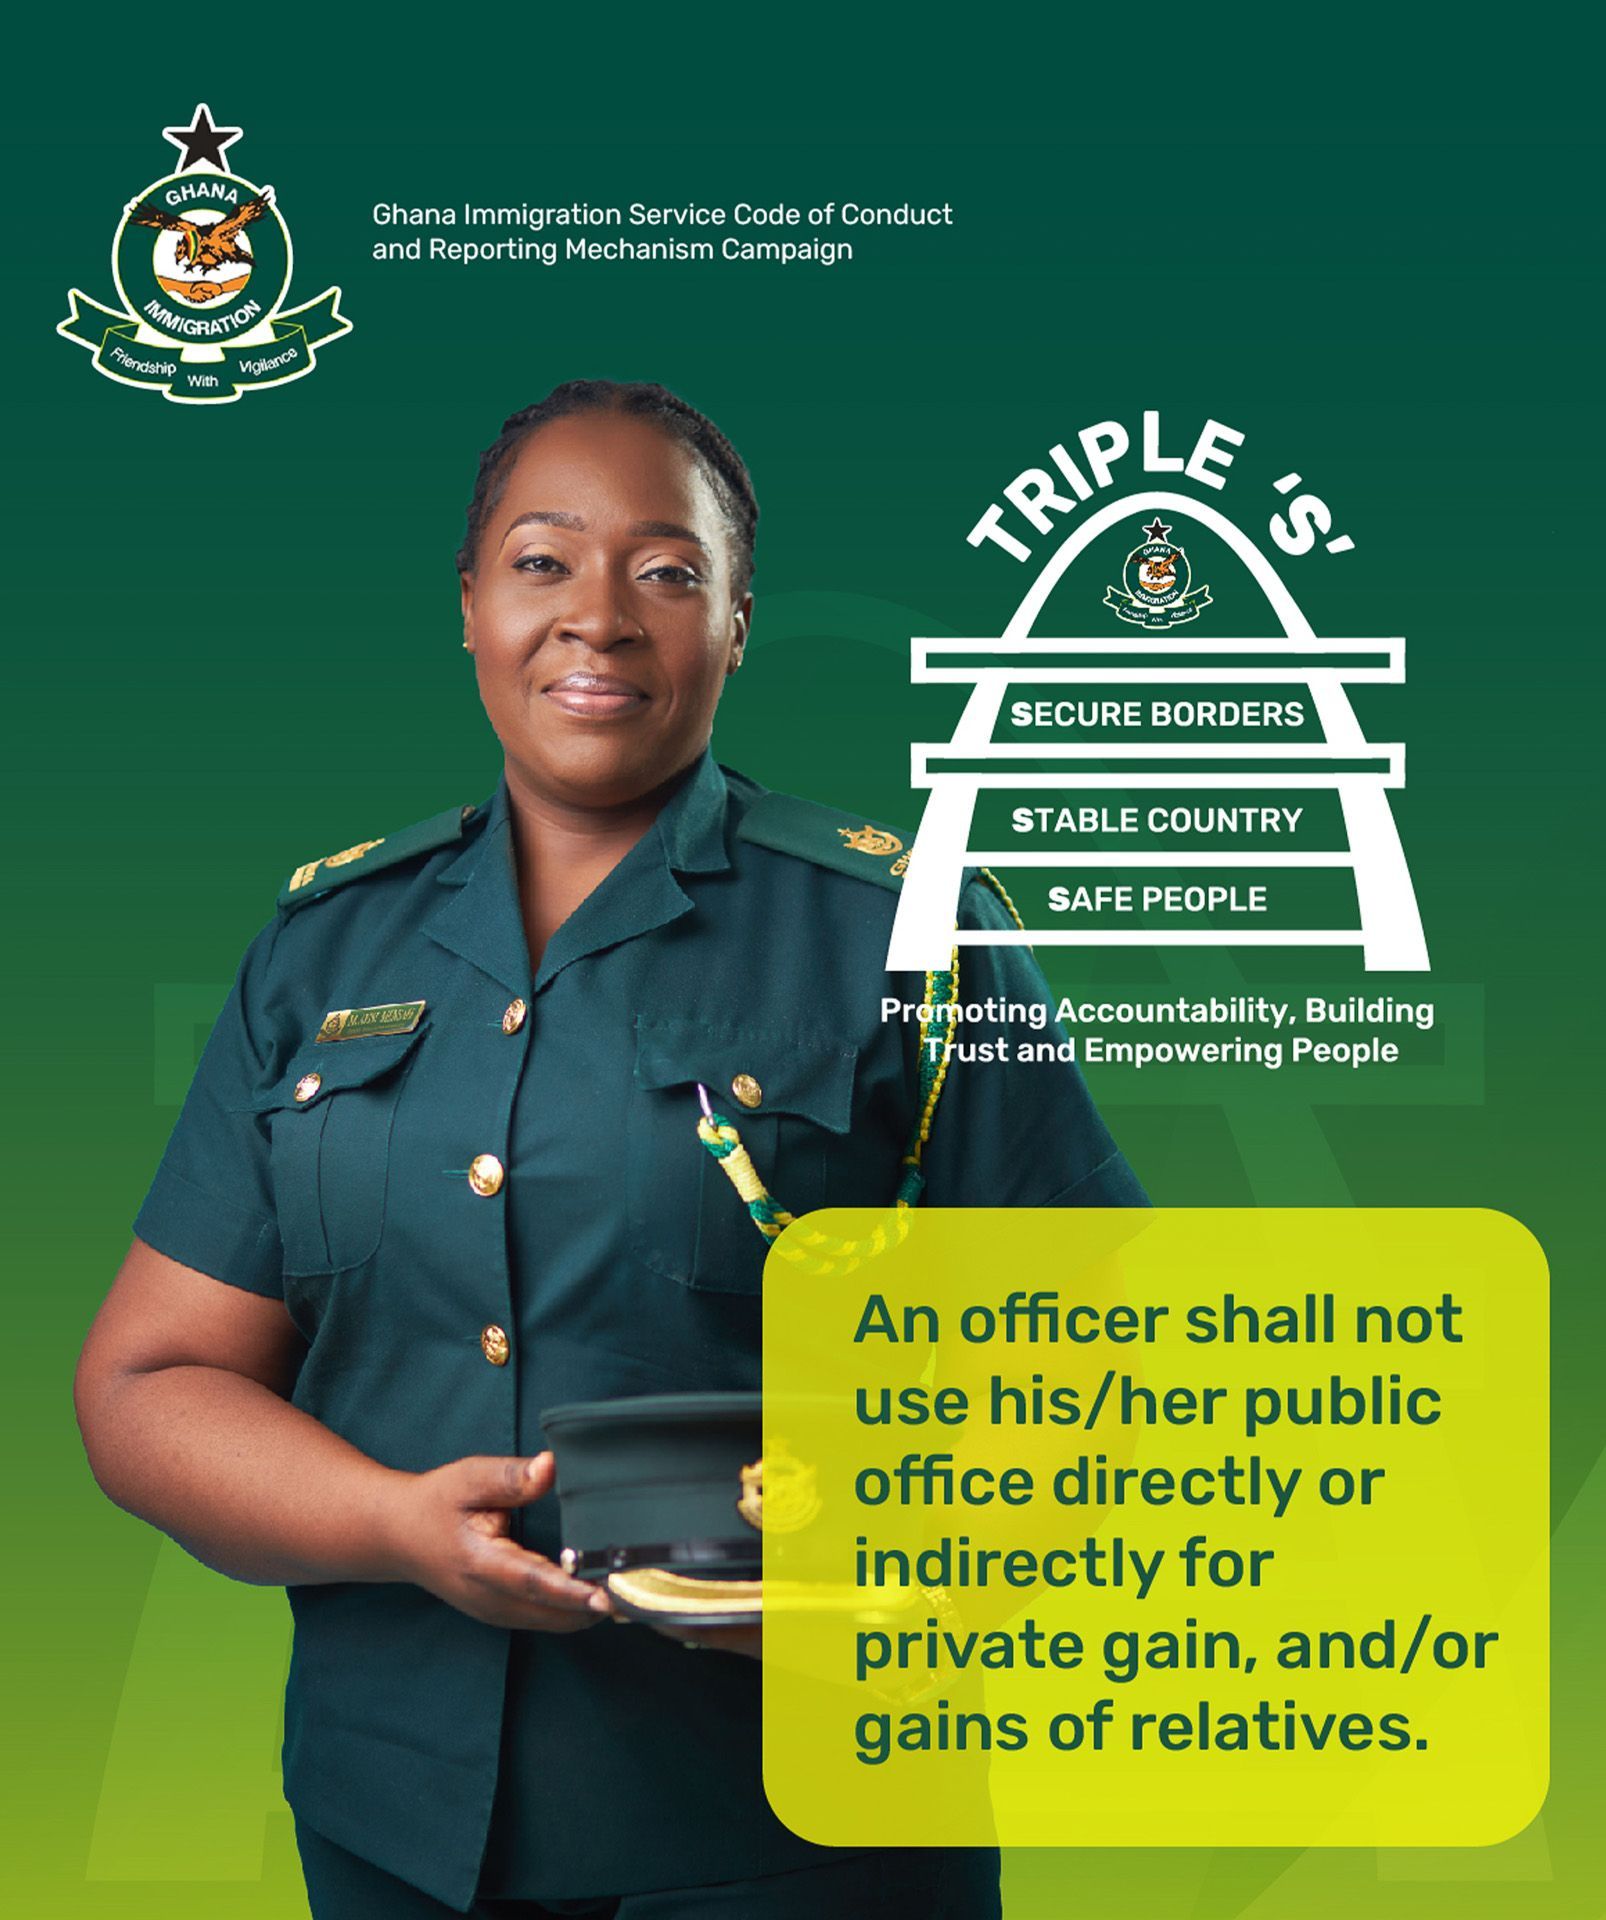 ThirdLaw branding and web design - Ghana Immigration Service Cover